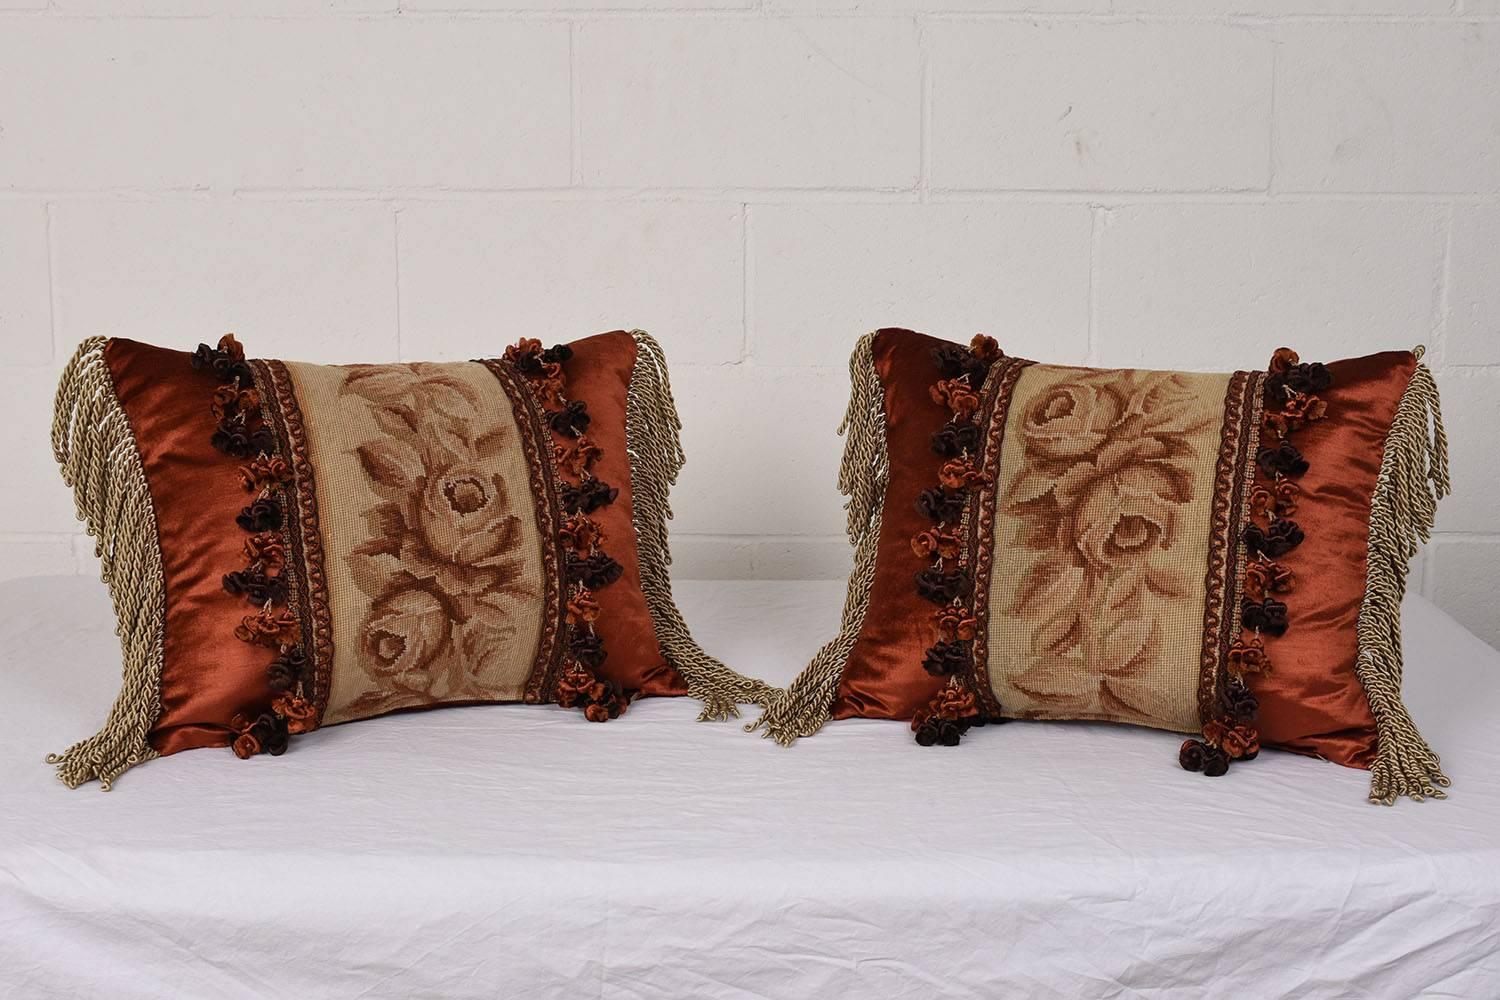 This set of three throw pillows feature antique Aubusson tapestry panels. The tapestries depict roses, leaves, and vines with simple decorative details. The border of the panels is accented by ornate multicolored tassels. The pillows are finished